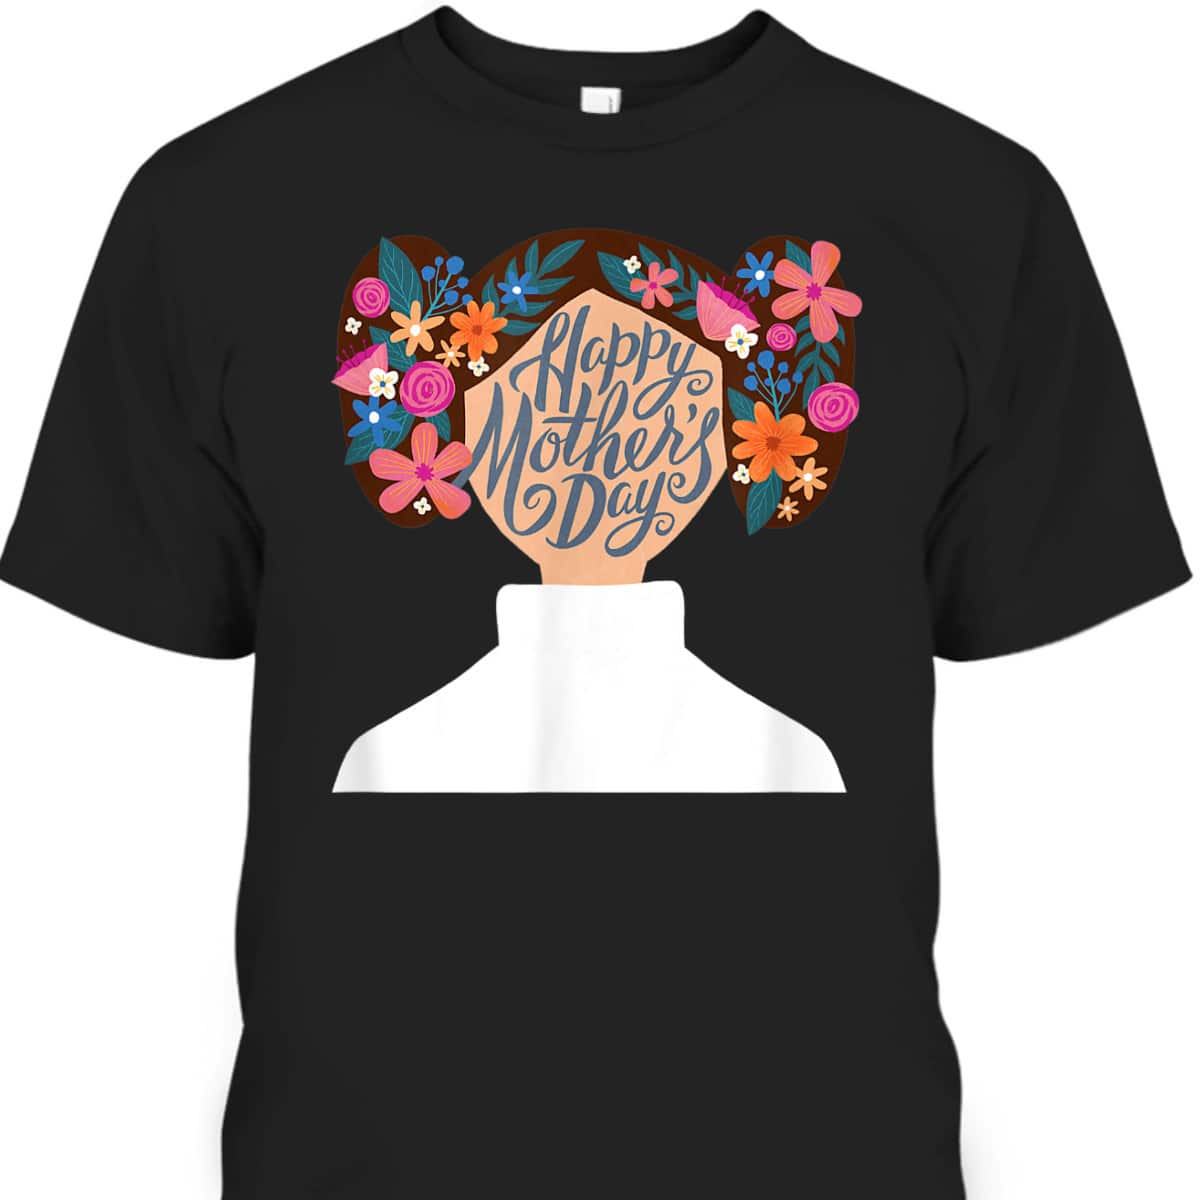 Star Wars Princess Leia Florals Happy Mother's Day T-Shirt